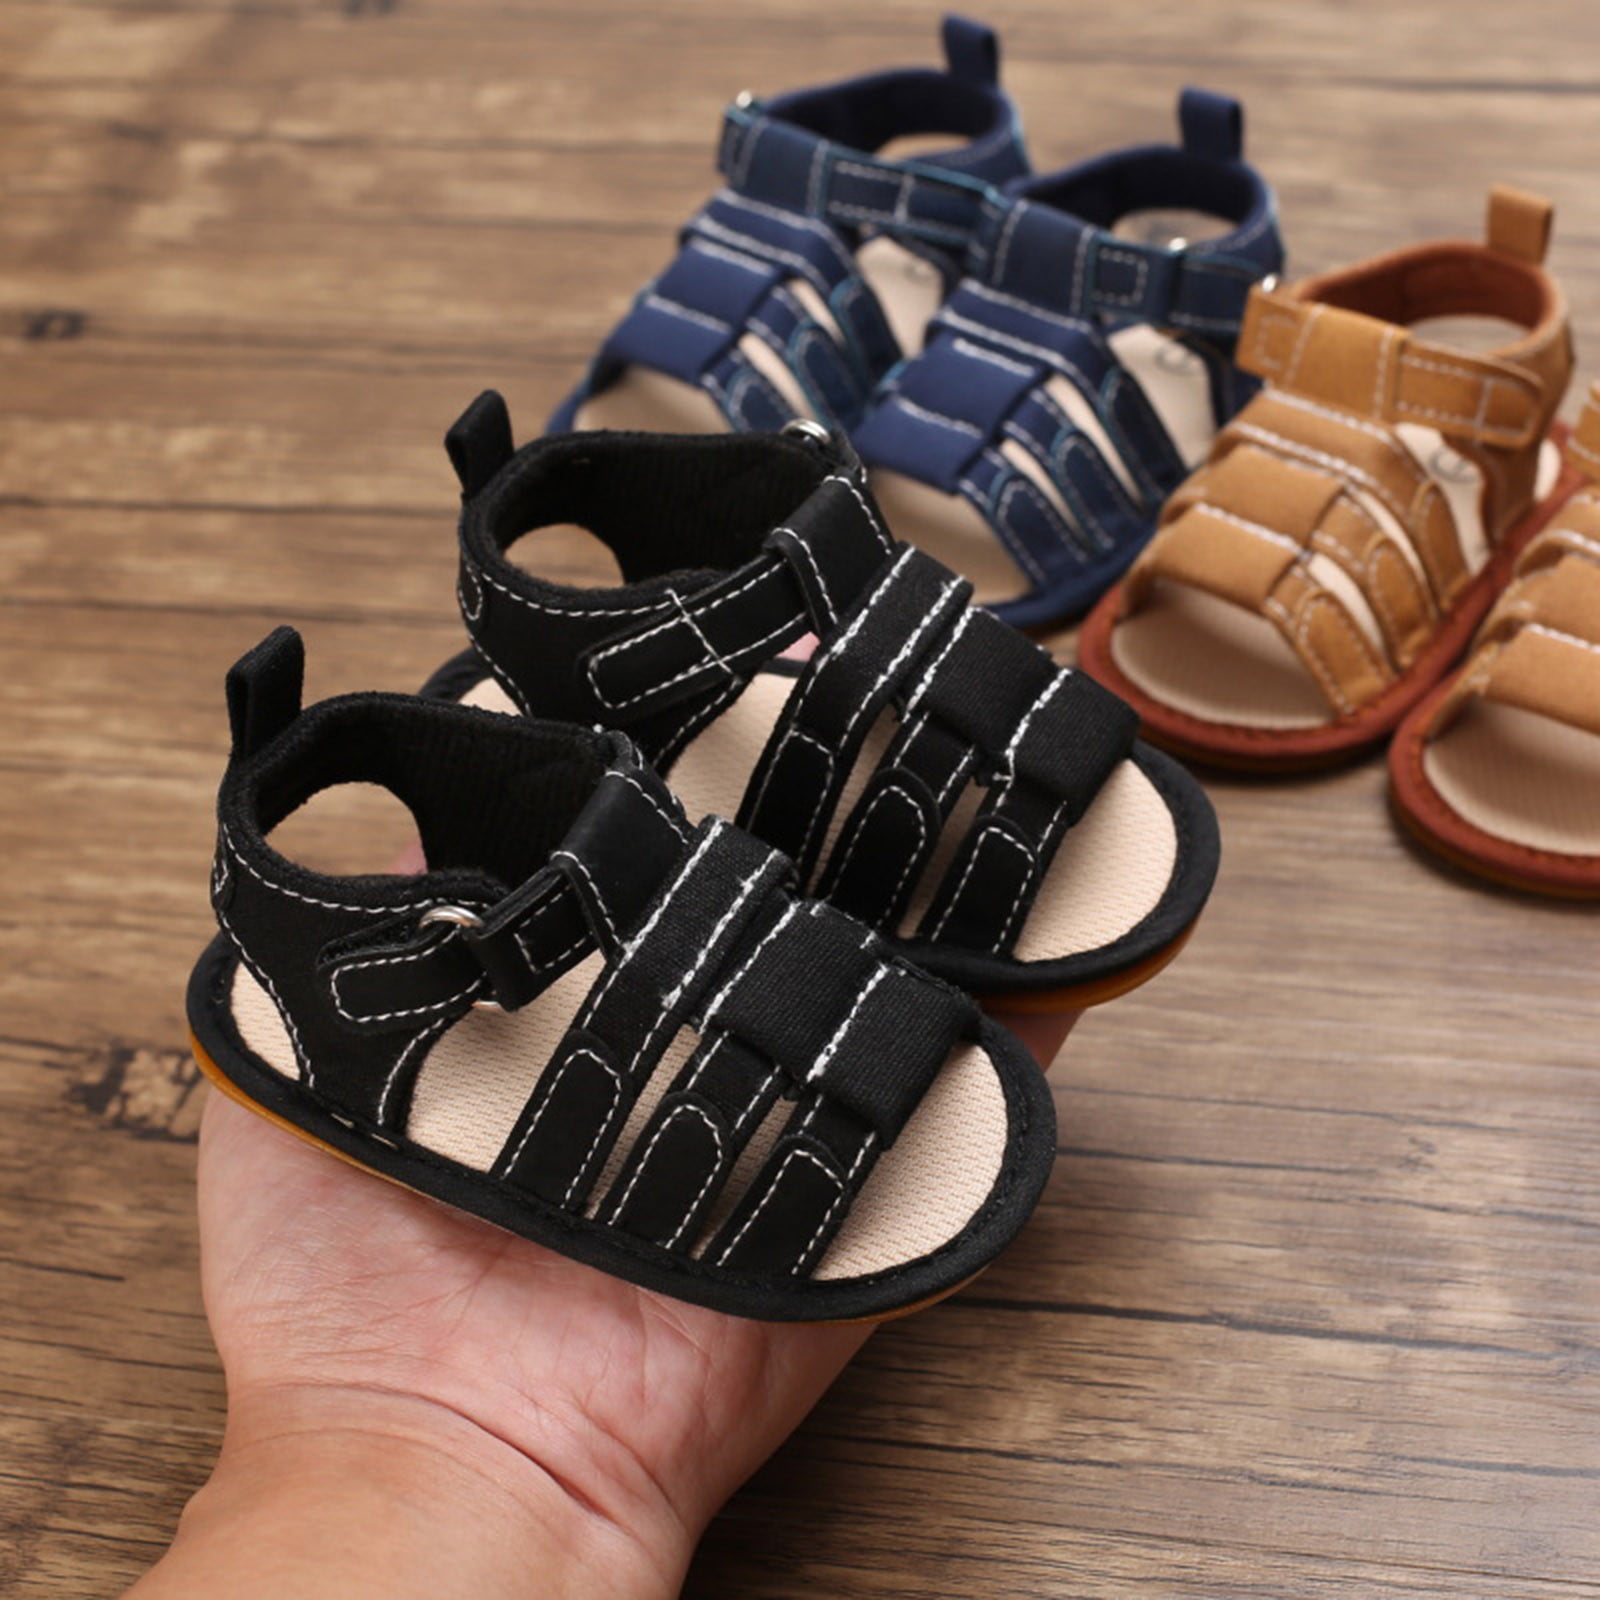 Baby BOY sandals (made with faux leather) | Make It & Love It